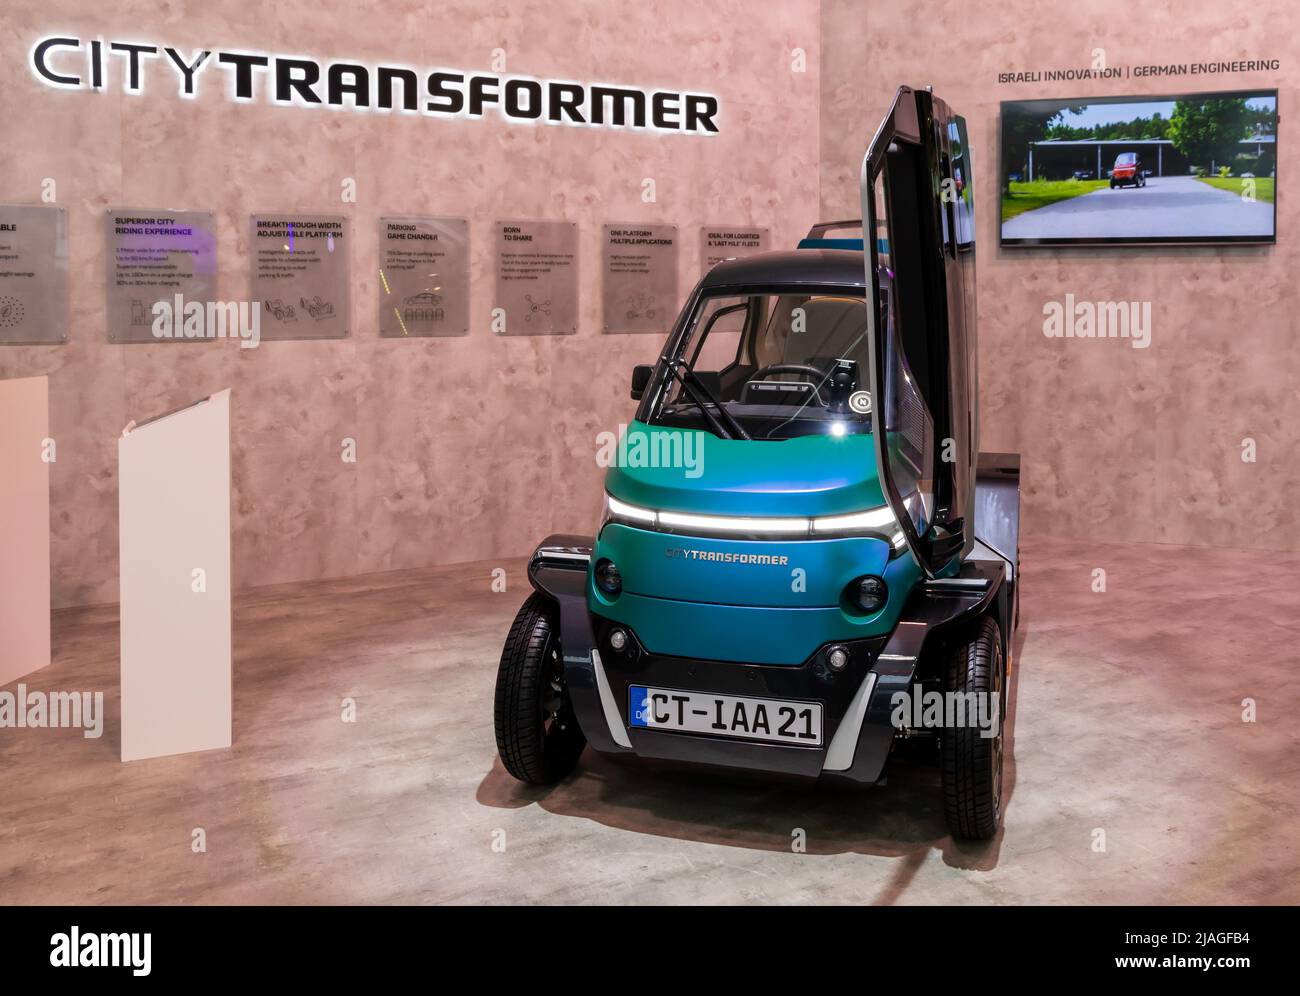 City Transformer electric foldable car showcased at the IAA Mobility 2021 motor show in Munich, Germany - September 6, 2021. Stock Photo